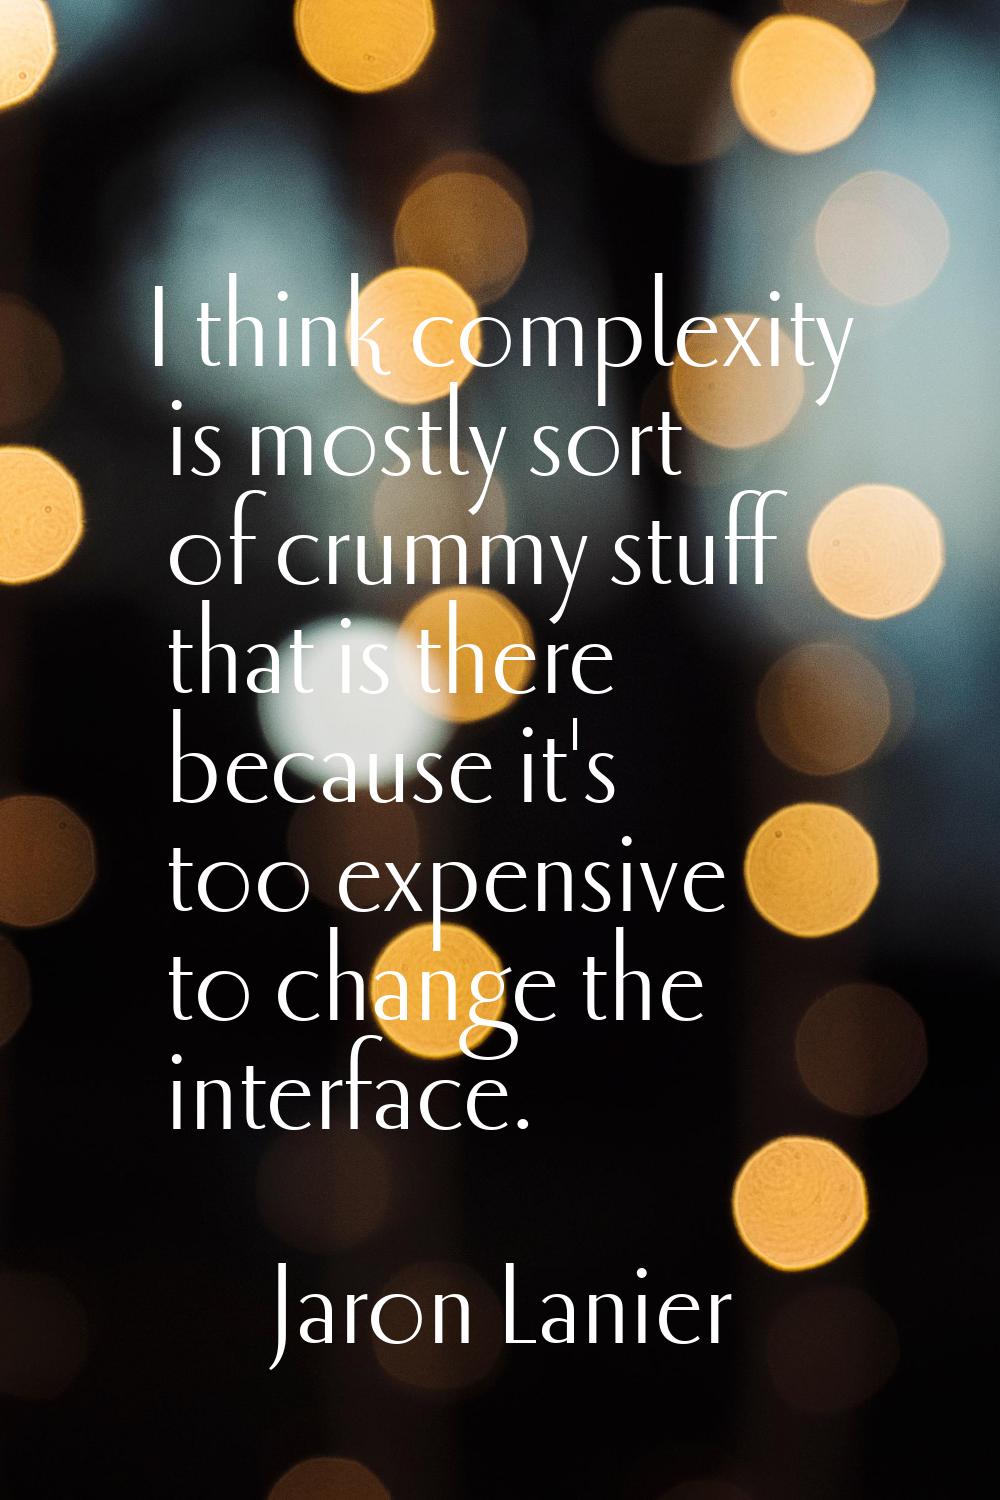 I think complexity is mostly sort of crummy stuff that is there because it's too expensive to chang